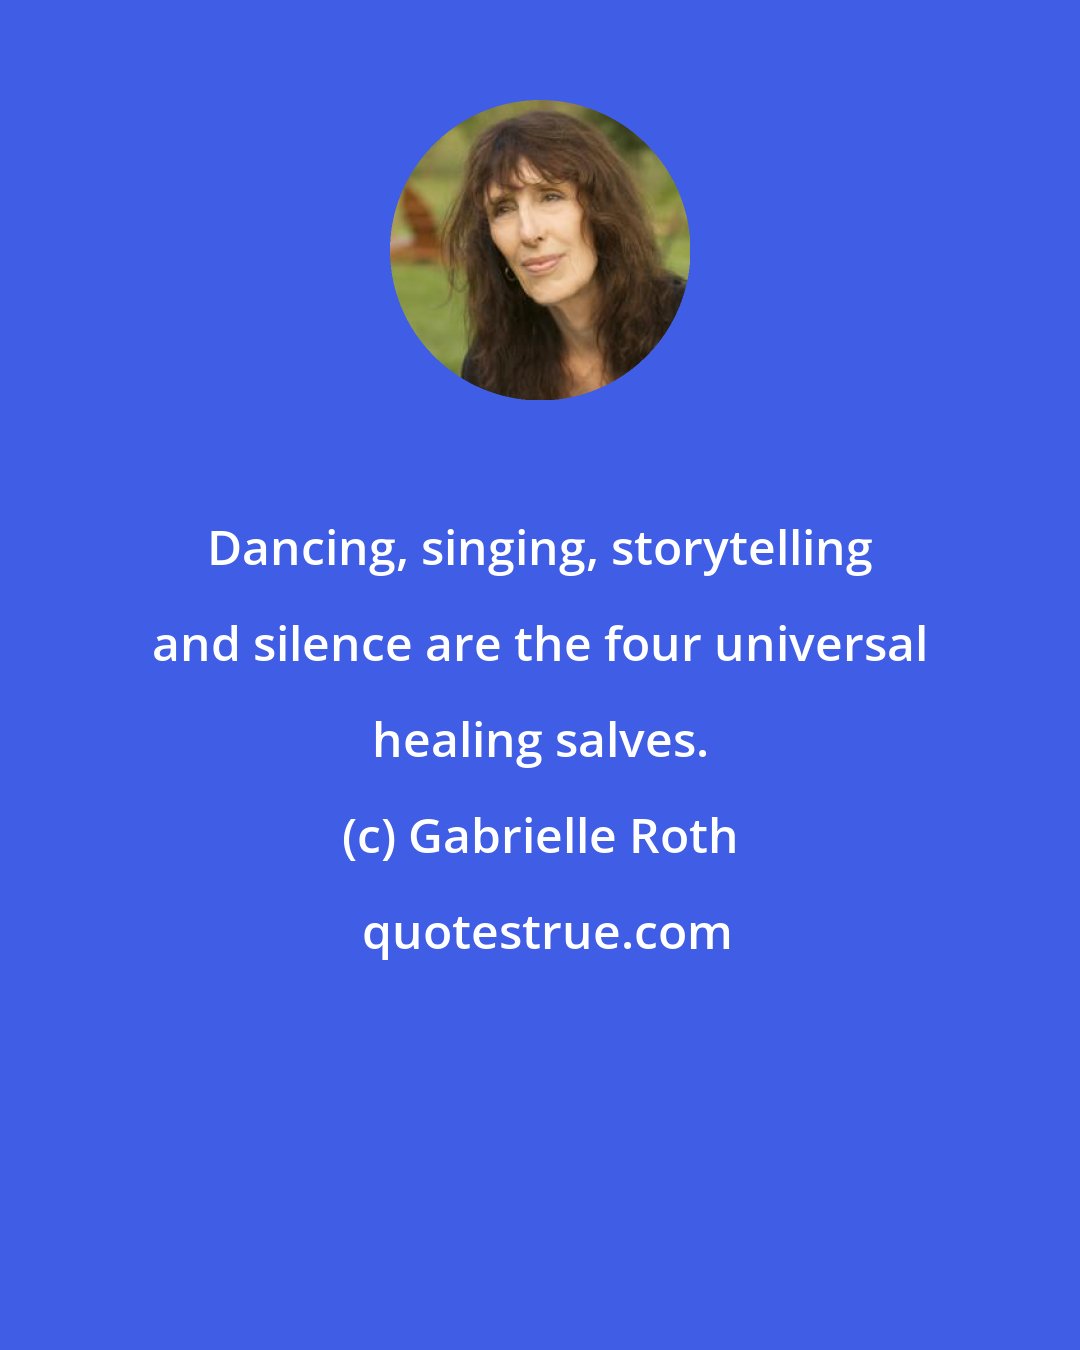 Gabrielle Roth: Dancing, singing, storytelling and silence are the four universal healing salves.